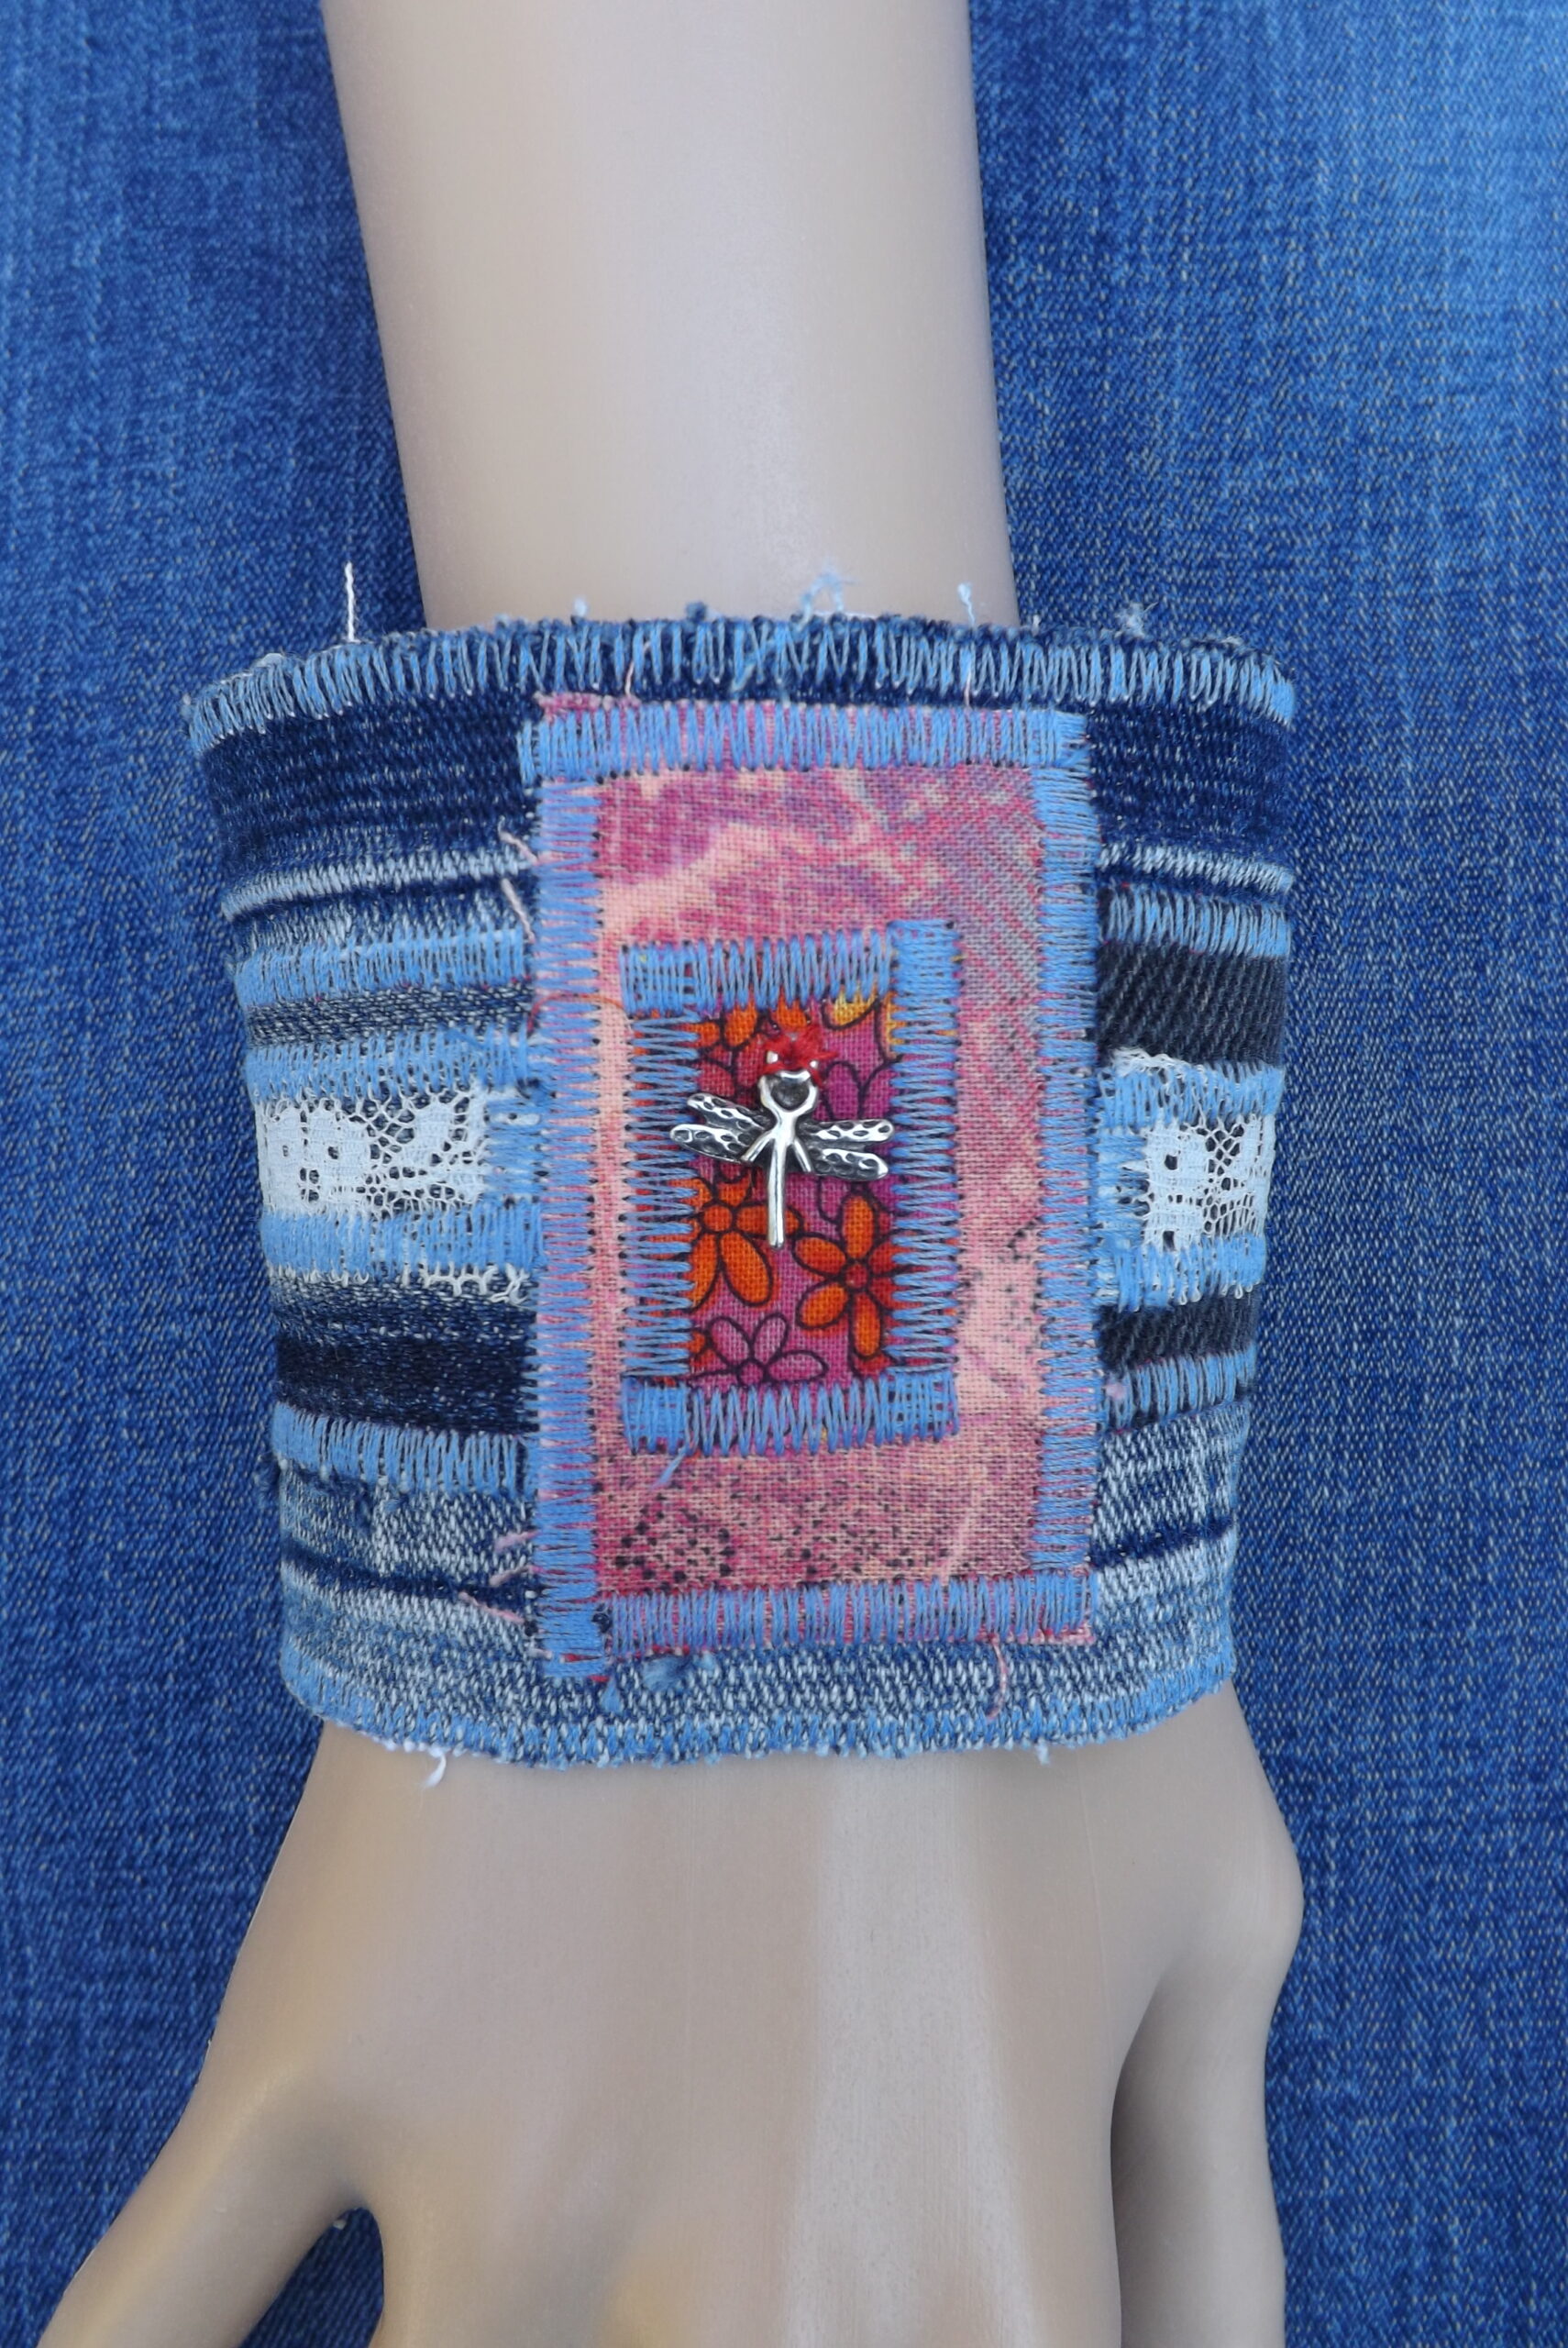 An upcycled denim cuff bracelet with dragonfly charm.